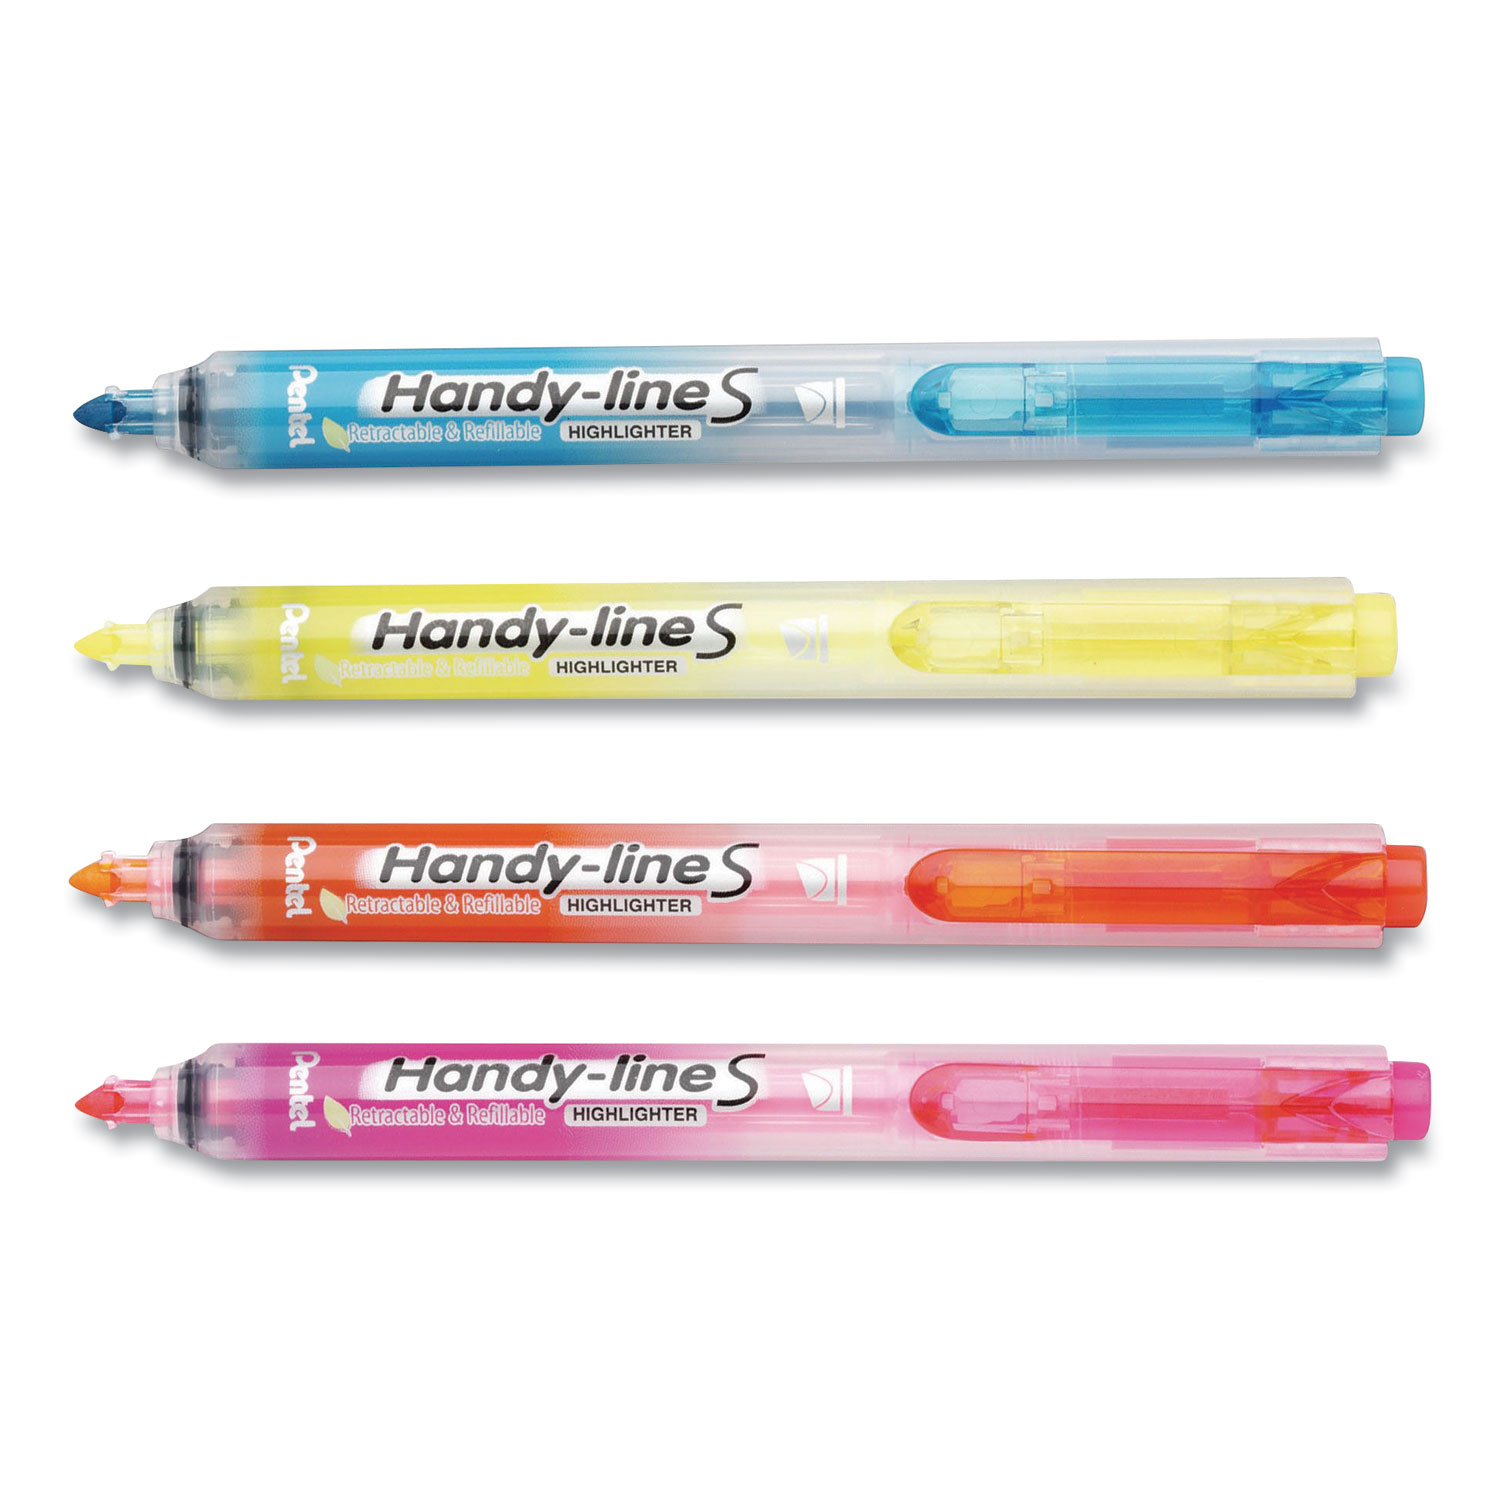  Pentel SXS15BPS4M Handy-line S Retractable and Refillable Highlighters, Ultra-Slim Barrel, Chisel Tip, Assorted Colors, 4/Pack (PEN698067) 